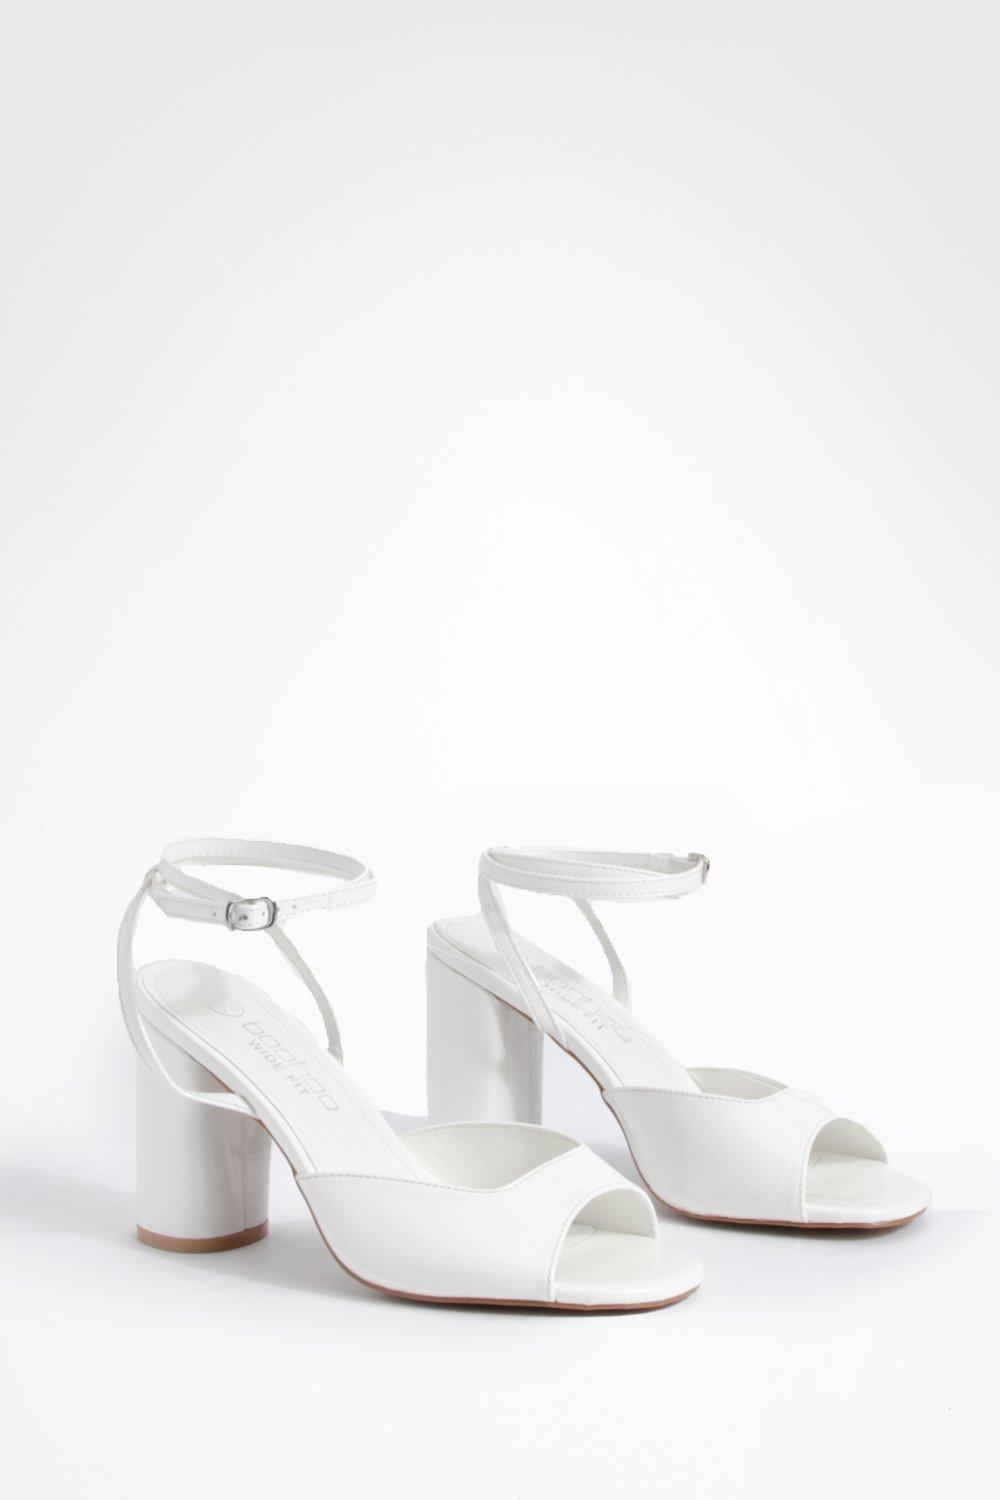 womens wide fit croc rounded heel strappy barely there heels - white - 38, white